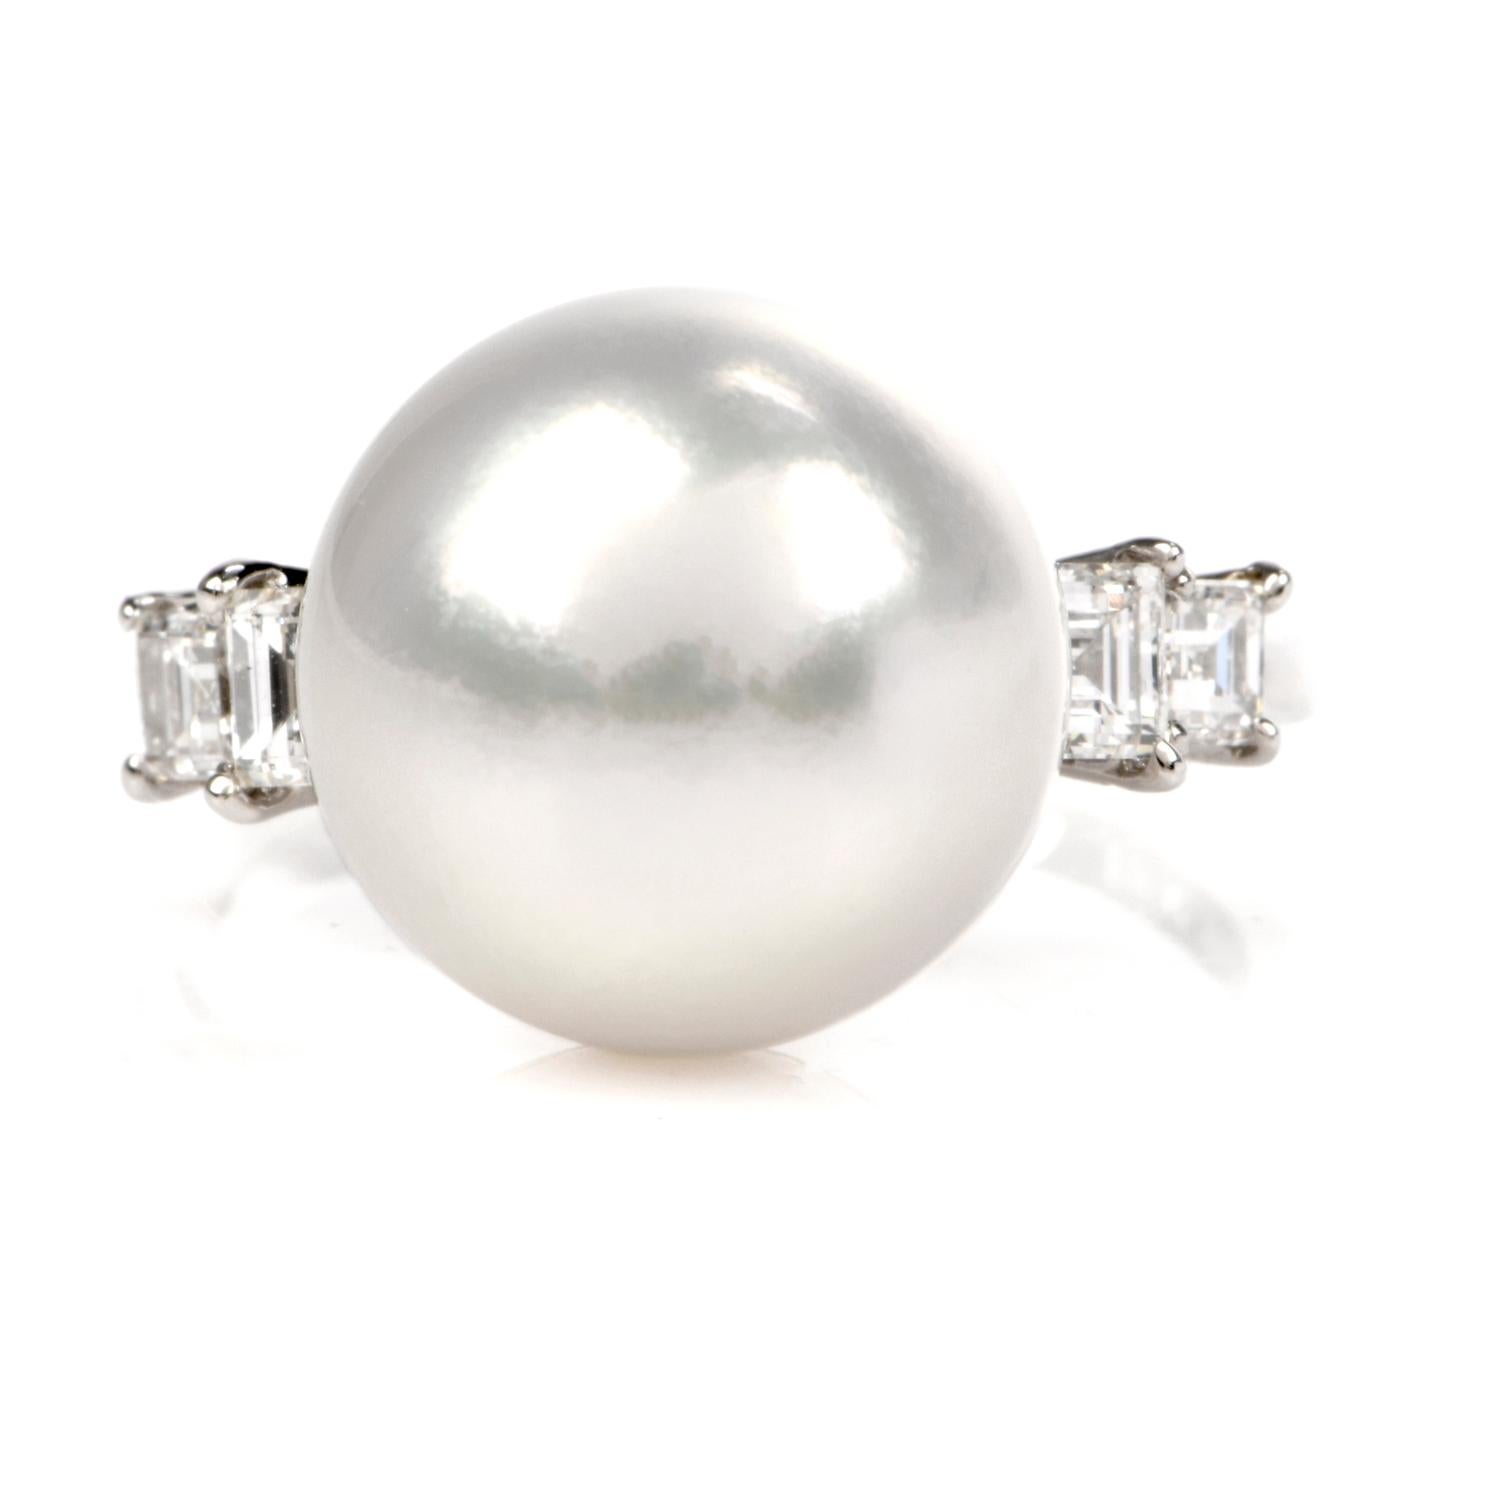 This exquisite cocktail ring with a highly lustrous 12mm South Sea Pearl of an enchanting white with a subtle nuance of pink color and Ascher-cut diamonds is crafted in solid platinum and weighs 5.7 grams. This cocktail ring exposes a 12mm AAA